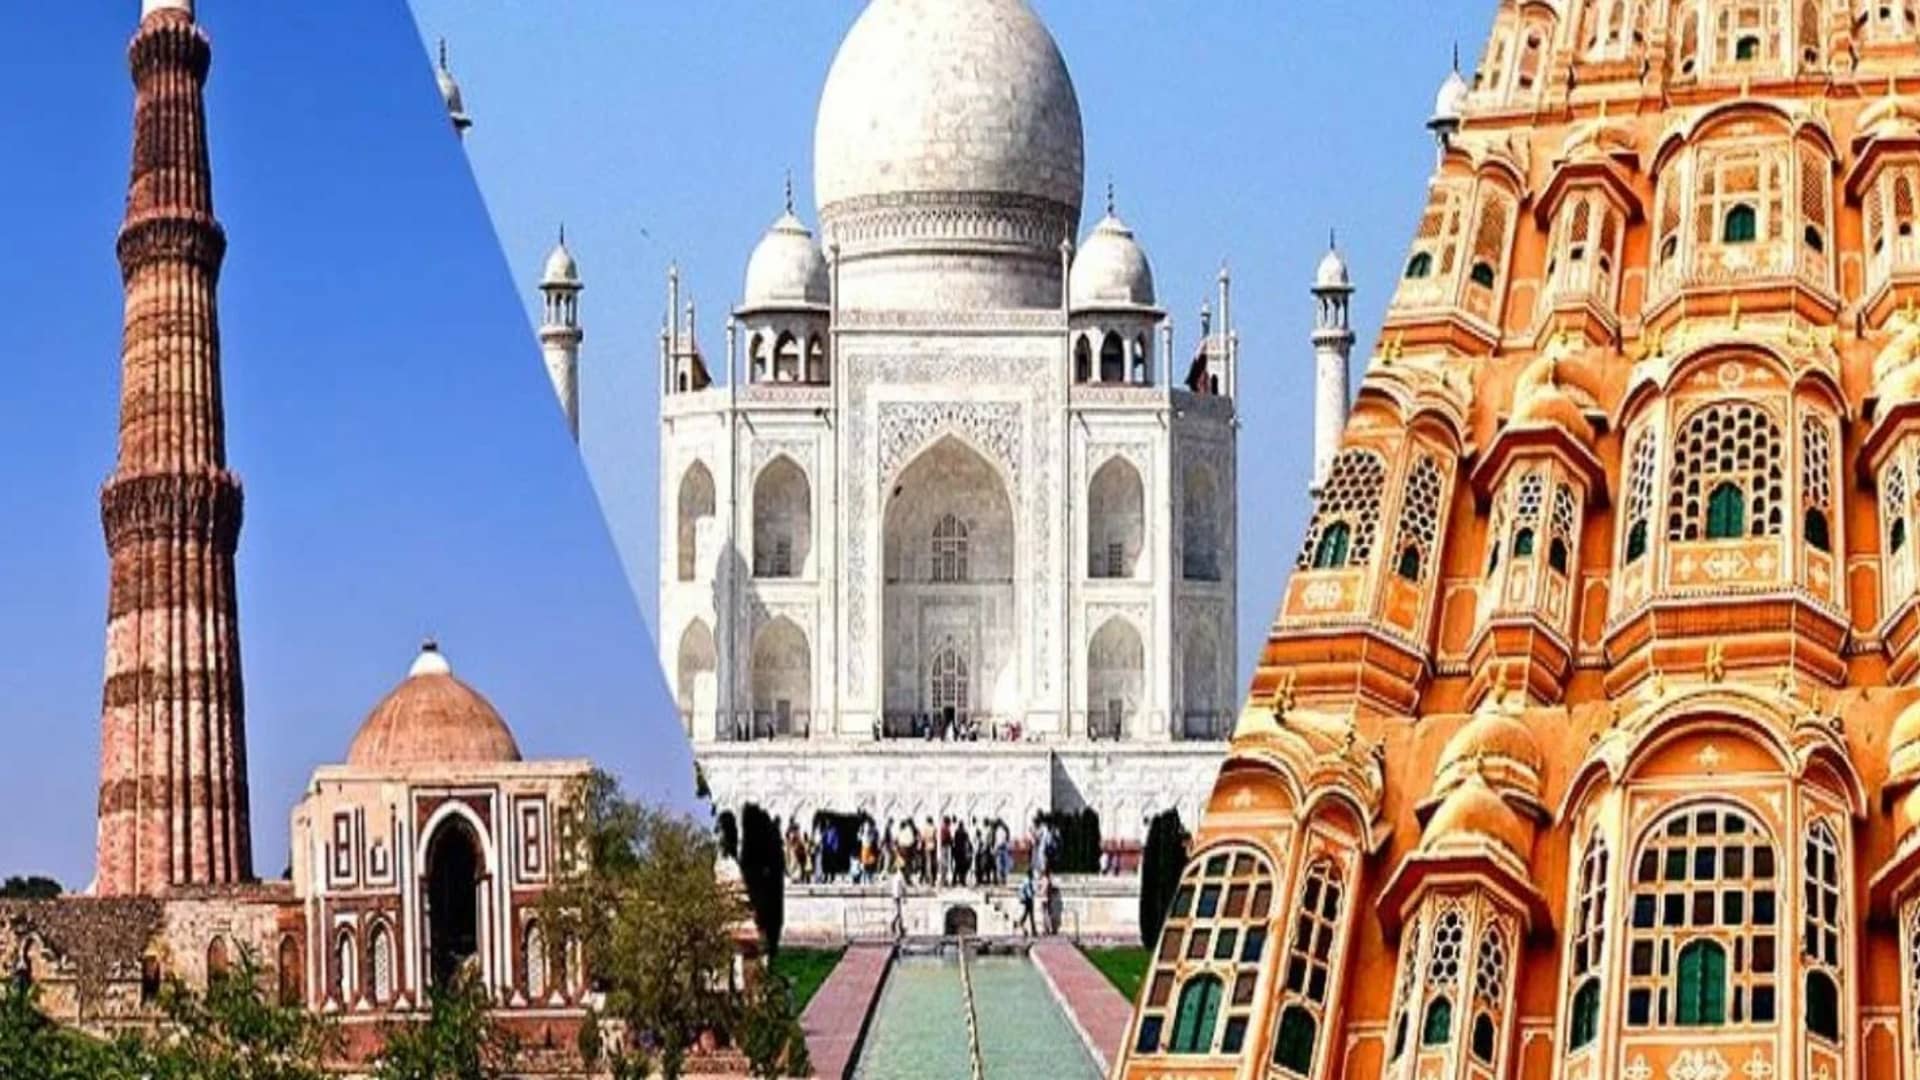 The Golden Triangle – Delhi, Agra and Jaipur